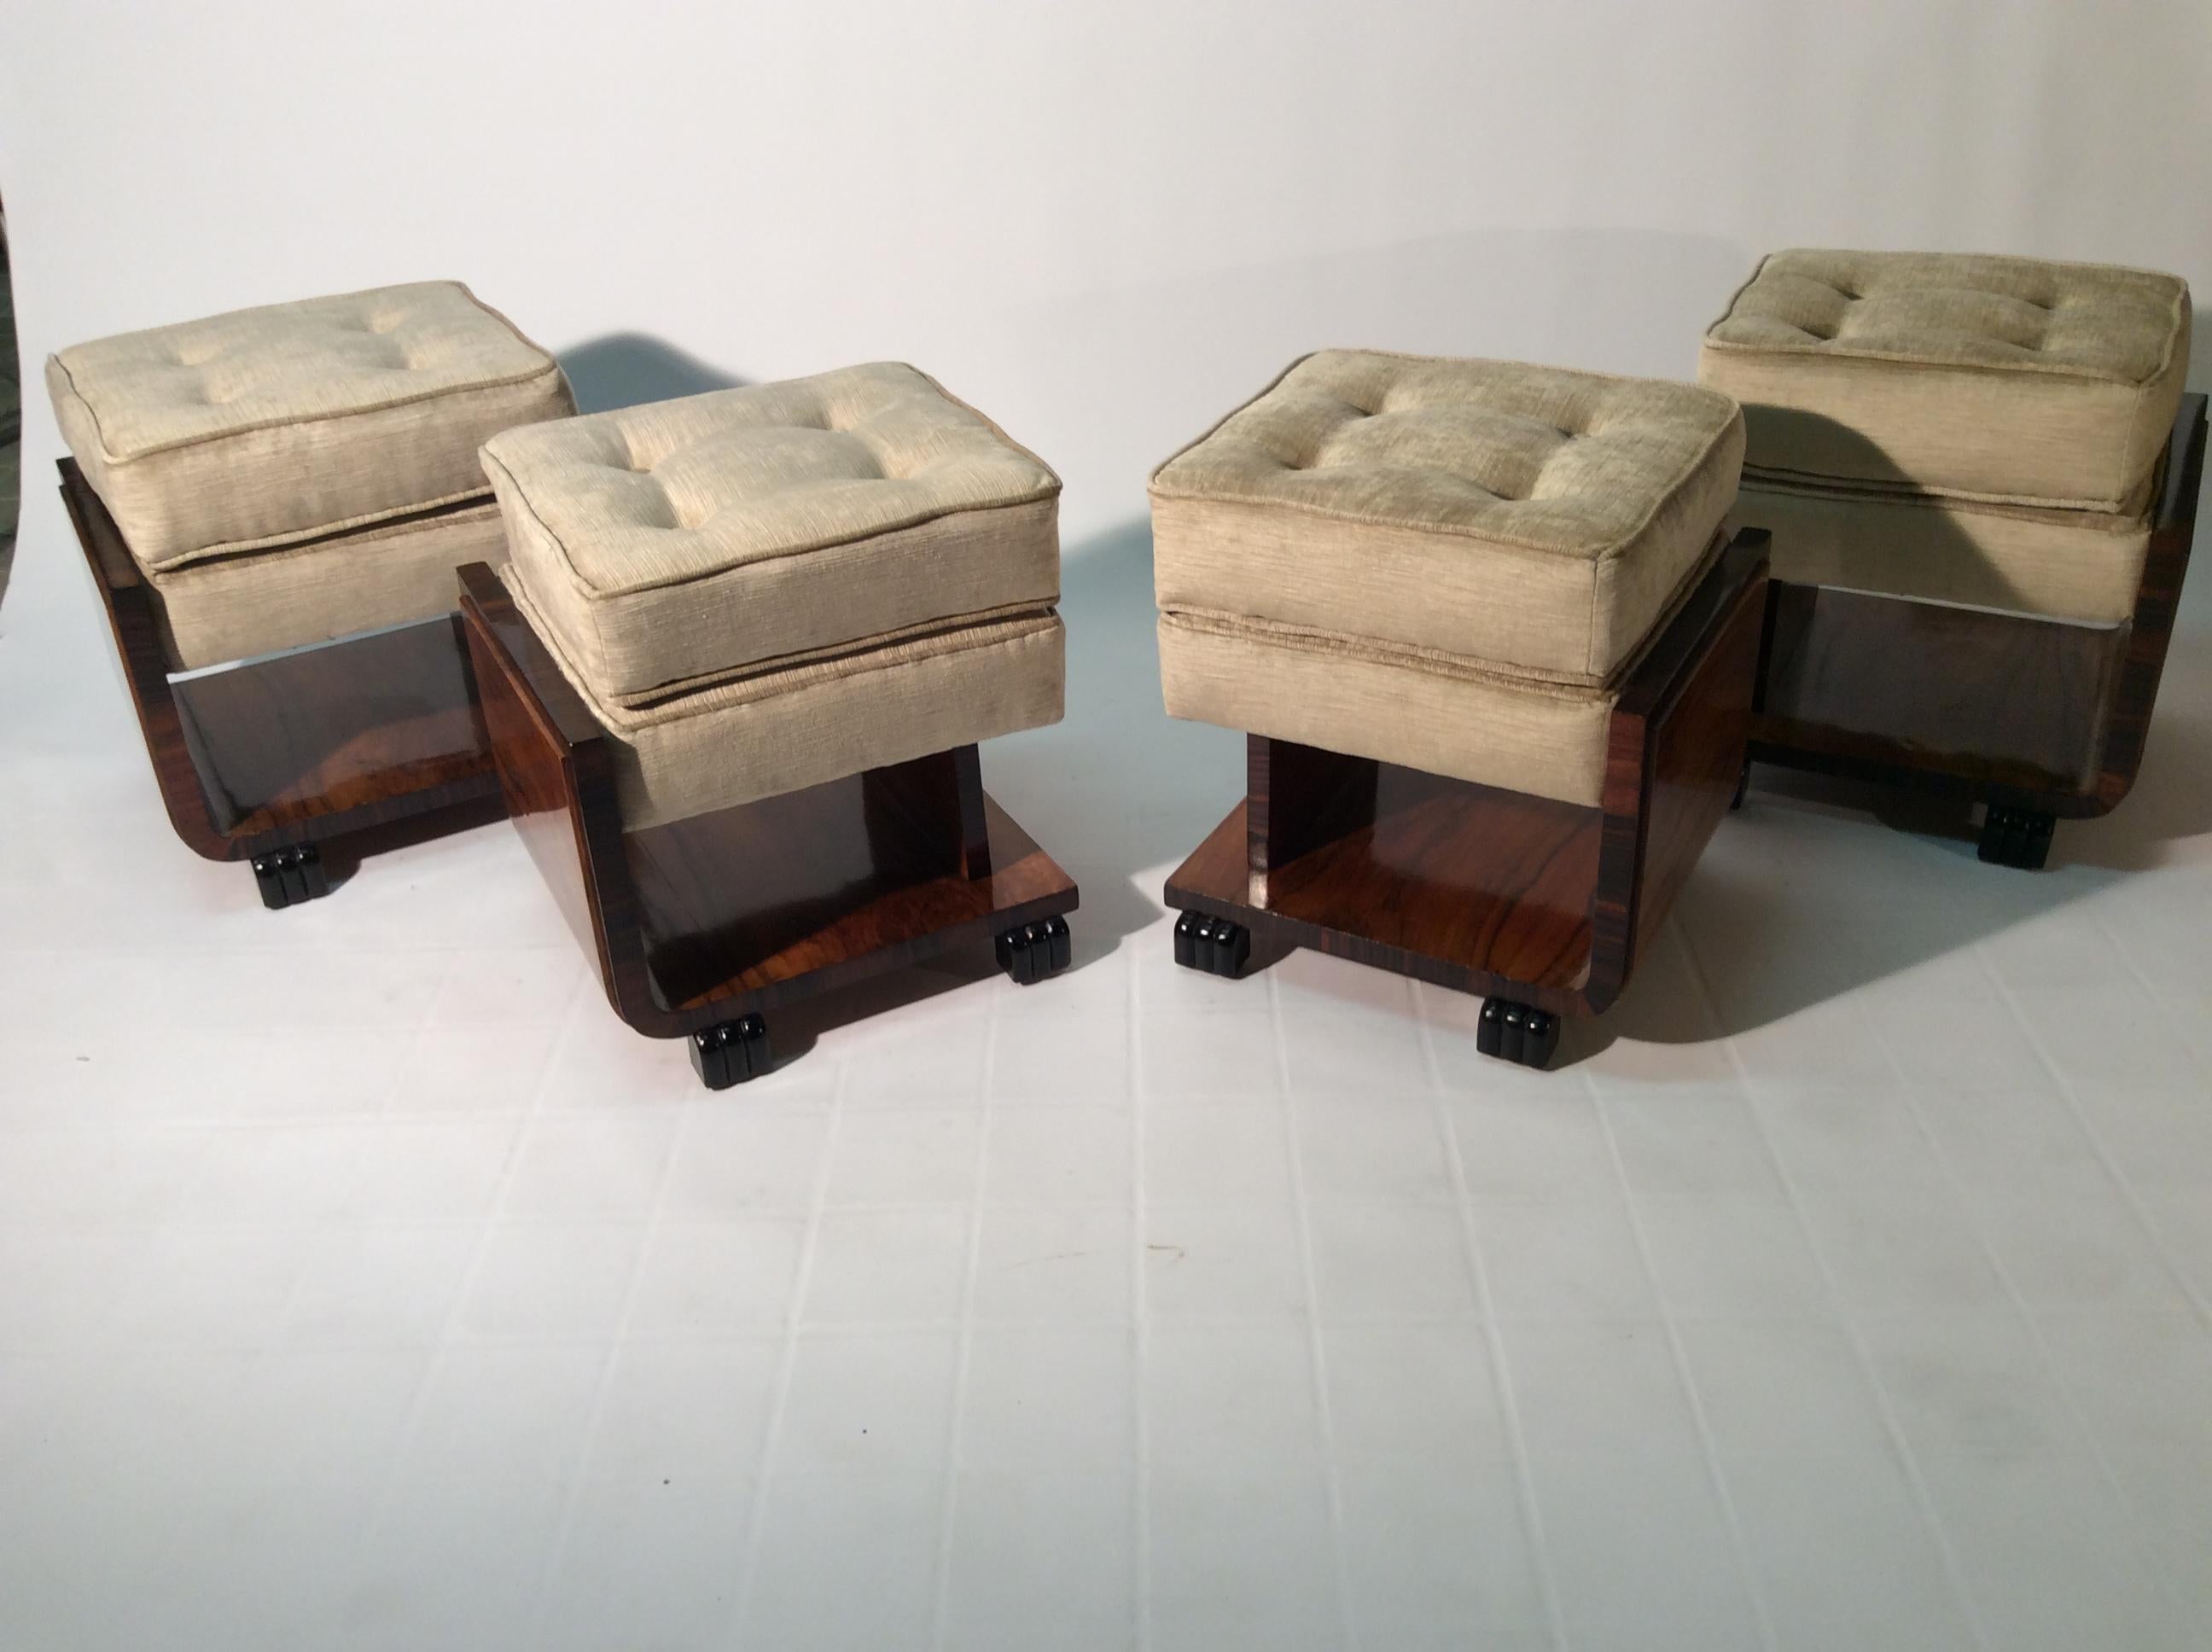 Four stools with a very particular shape made by Meroni e Fossati Italy in the 1930s Art Deco period in national walnut with edging in darker precious exotic wood that create a beautiful contrasting effect.
Each stool has 4 black lacquered grooved